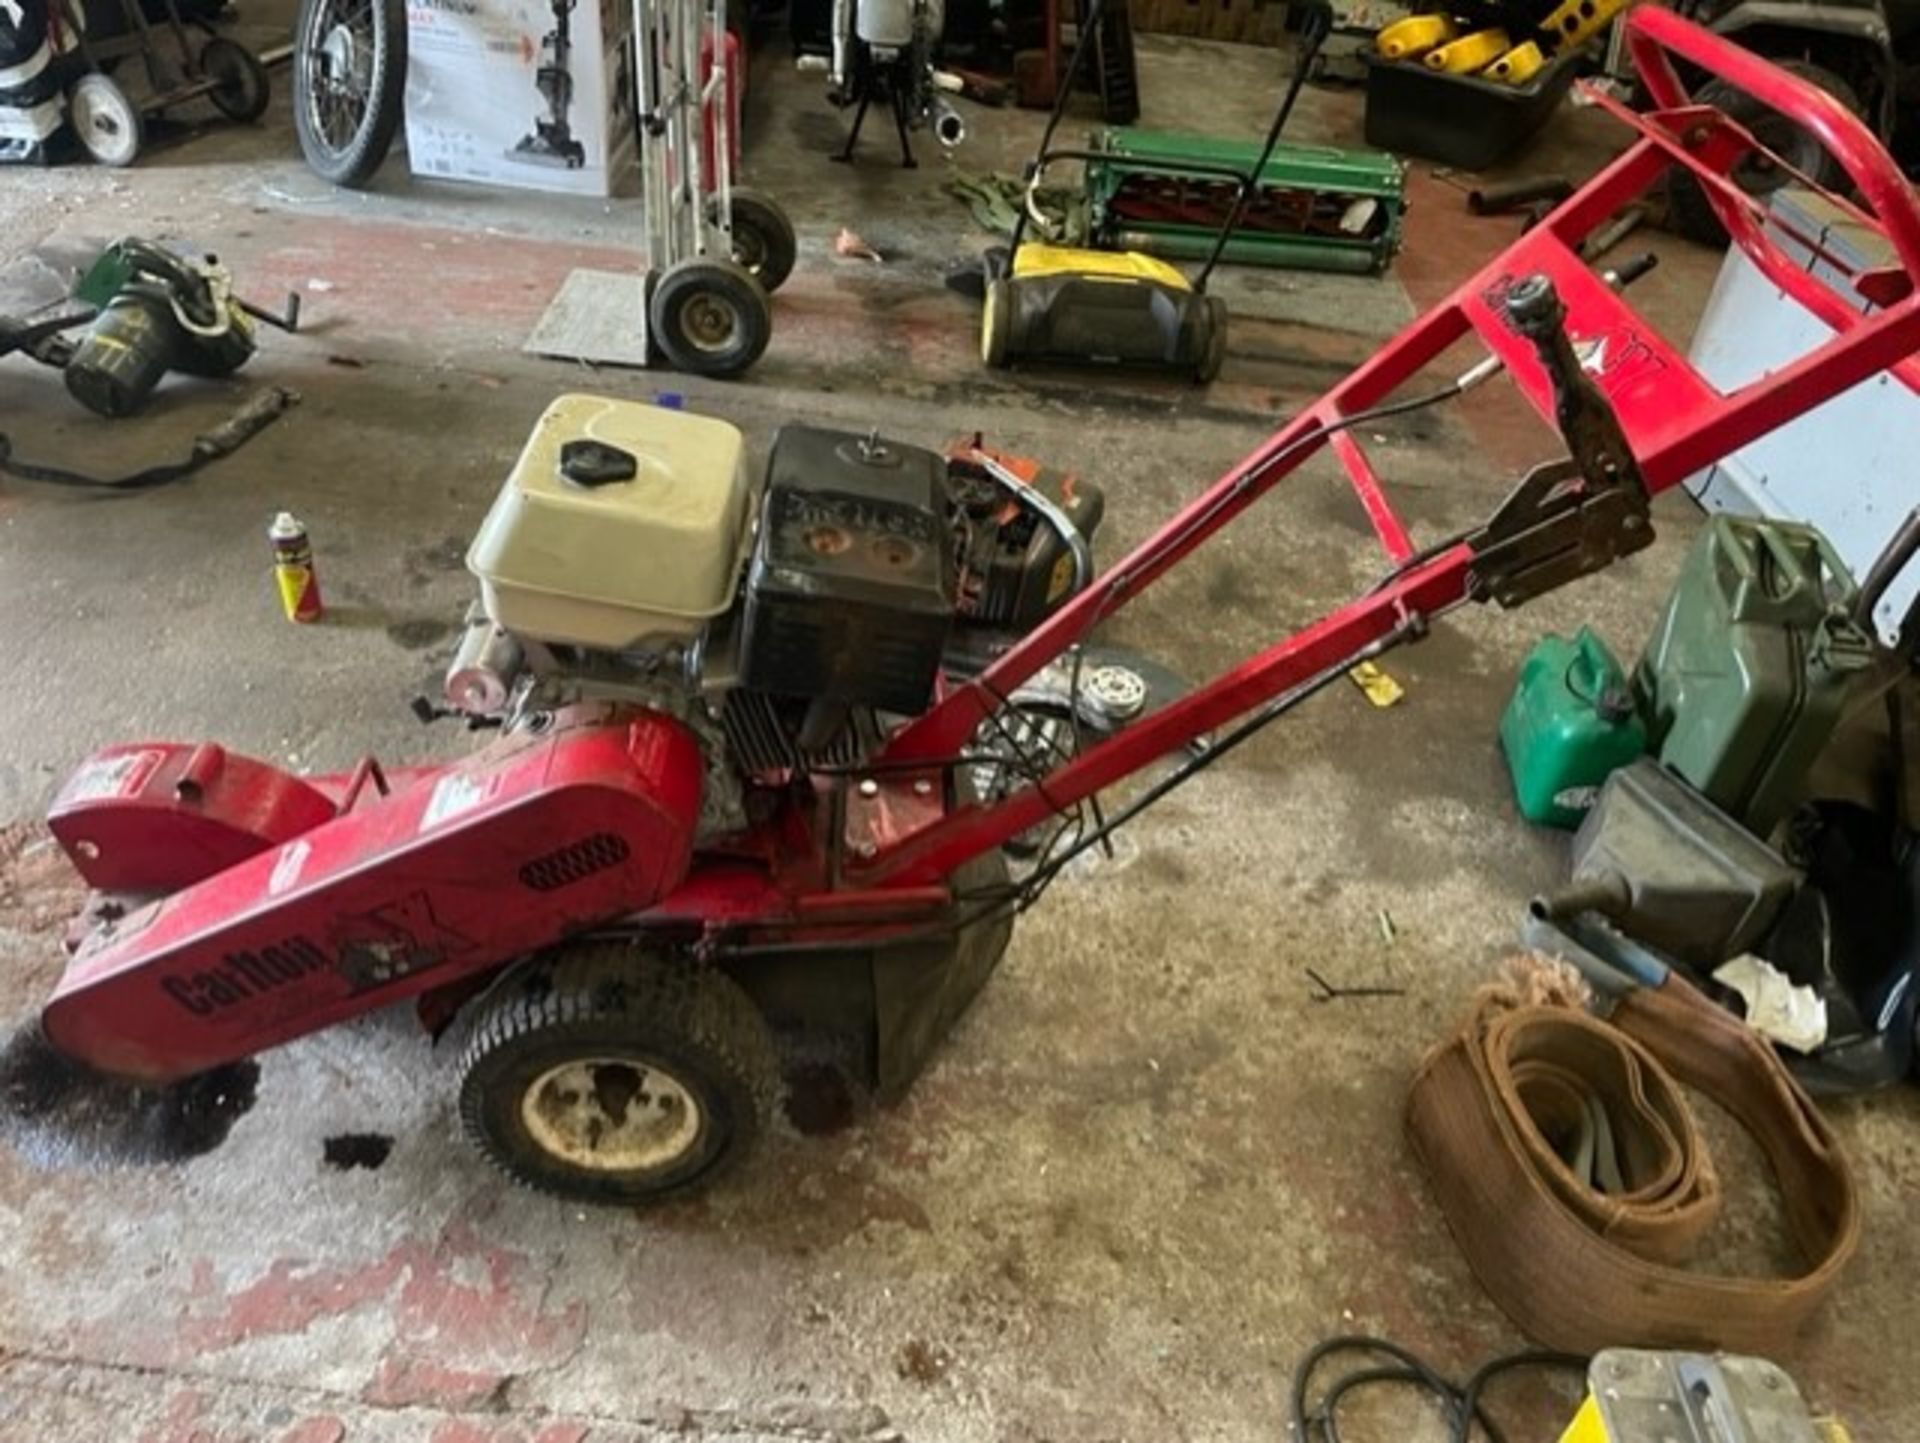 Carlton stump grinder that has an electric start lifan 390 engine in it the engine fires up and only